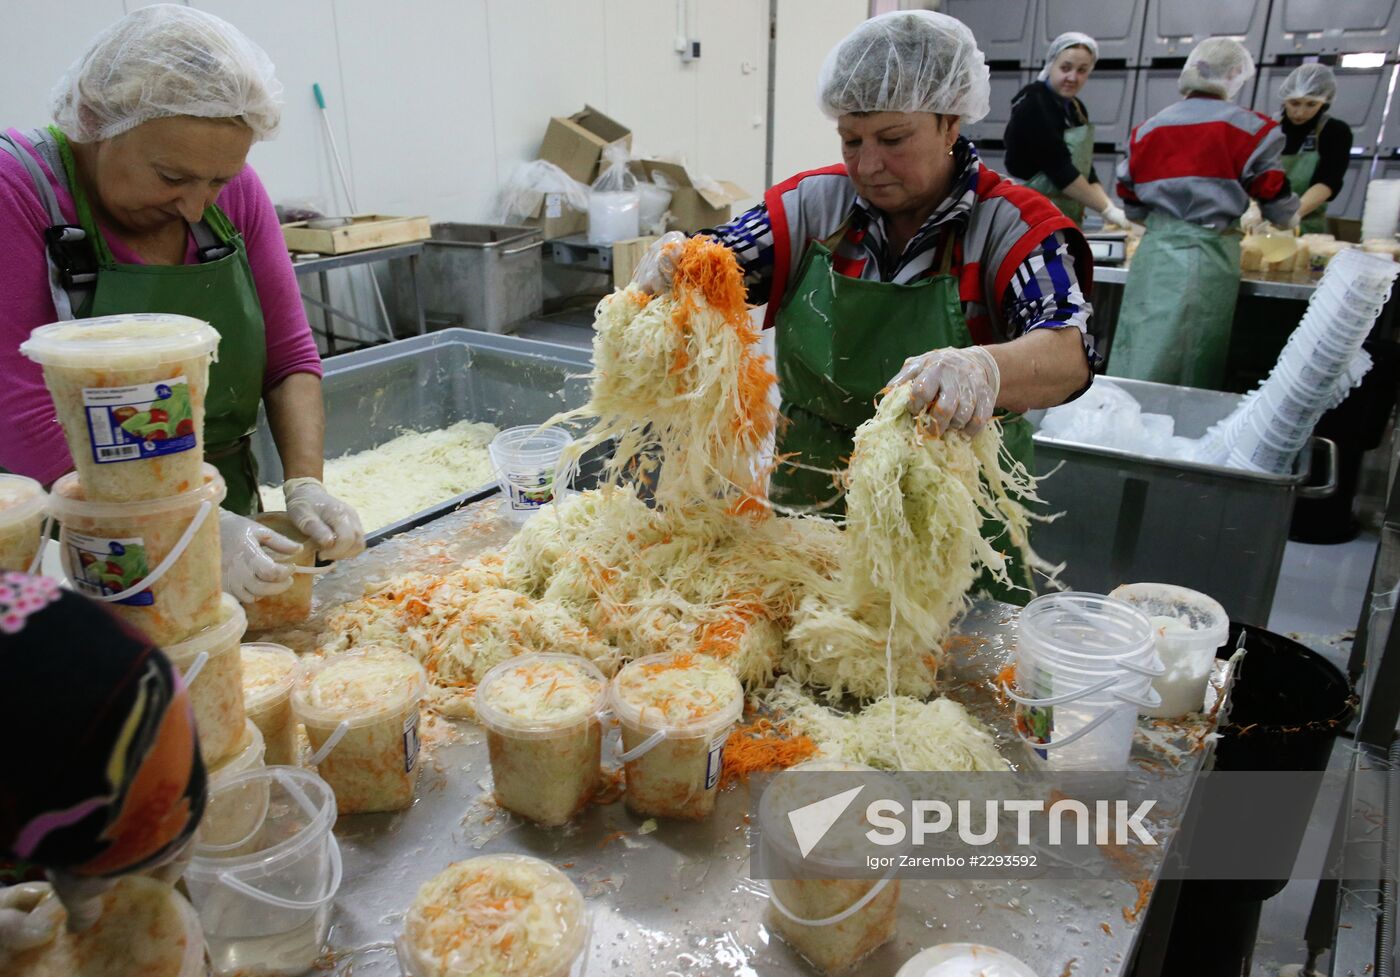 Canned vegetables production at Kaliningrad plant